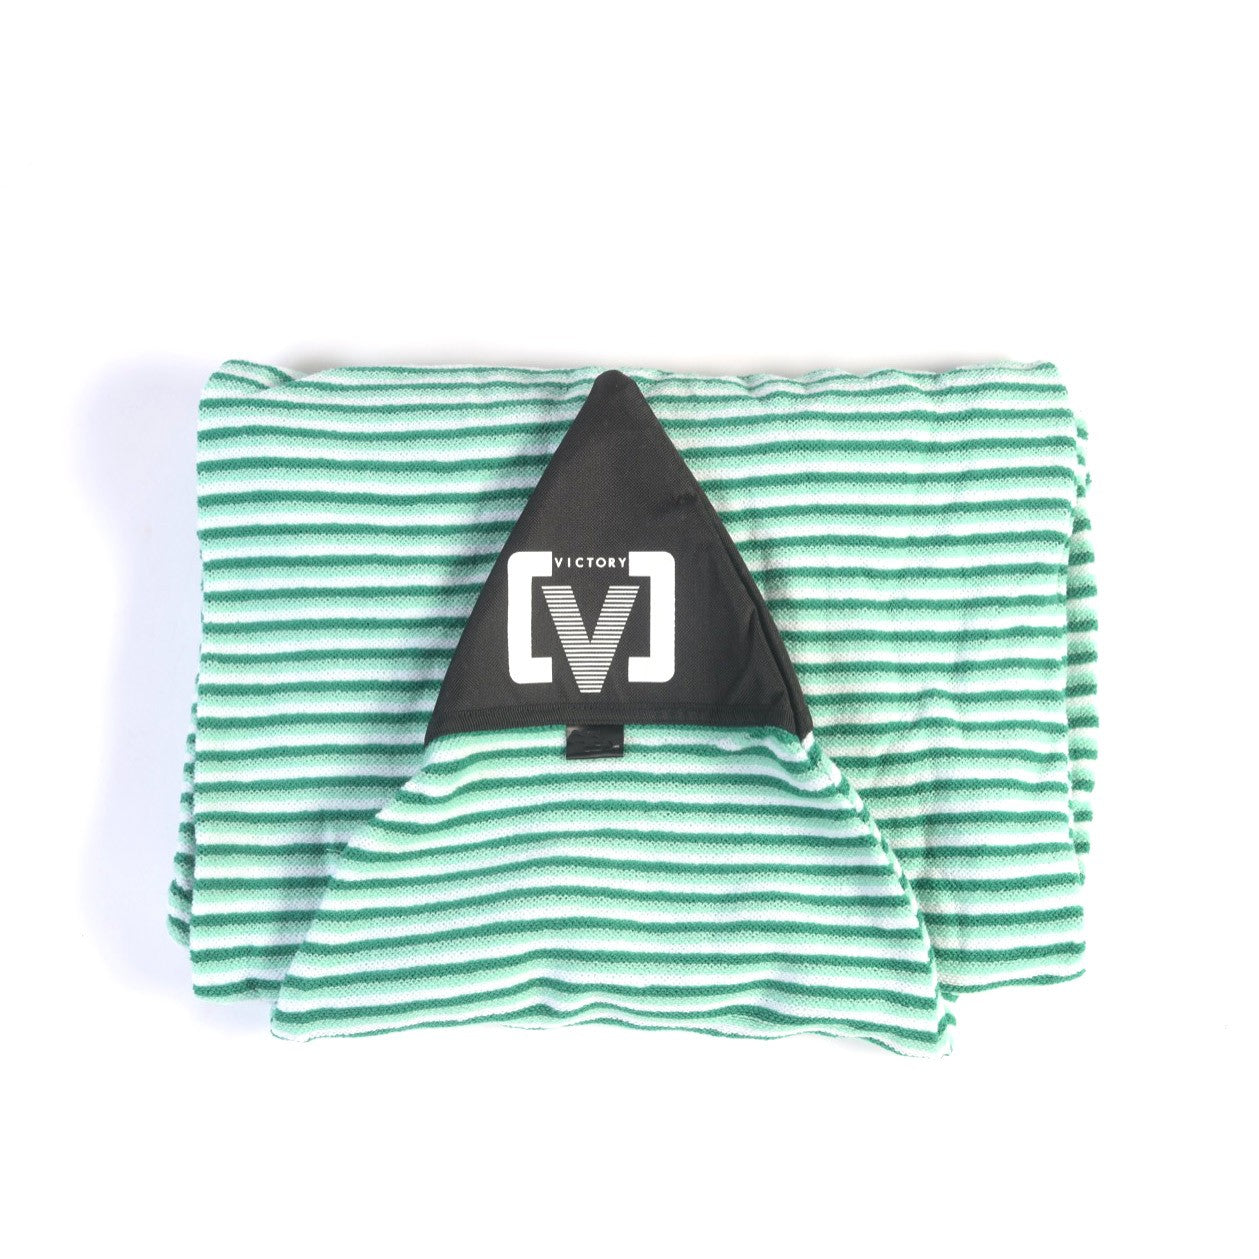 VICTORY - Surf Sock Cover - Shortboard - 6'3 - Green / White